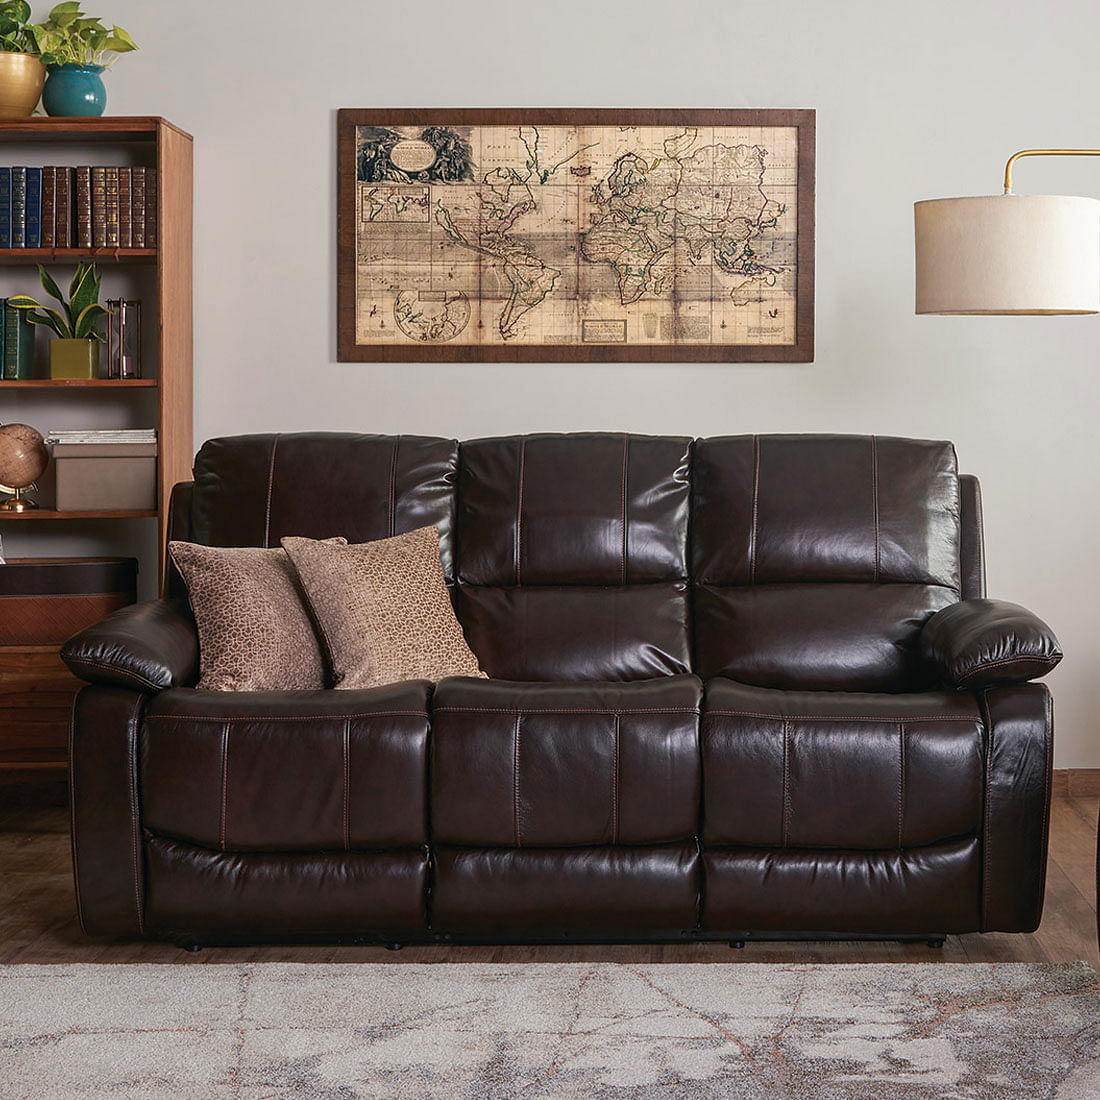 William Half Leather 3 Seater Recliner in Brown Colour